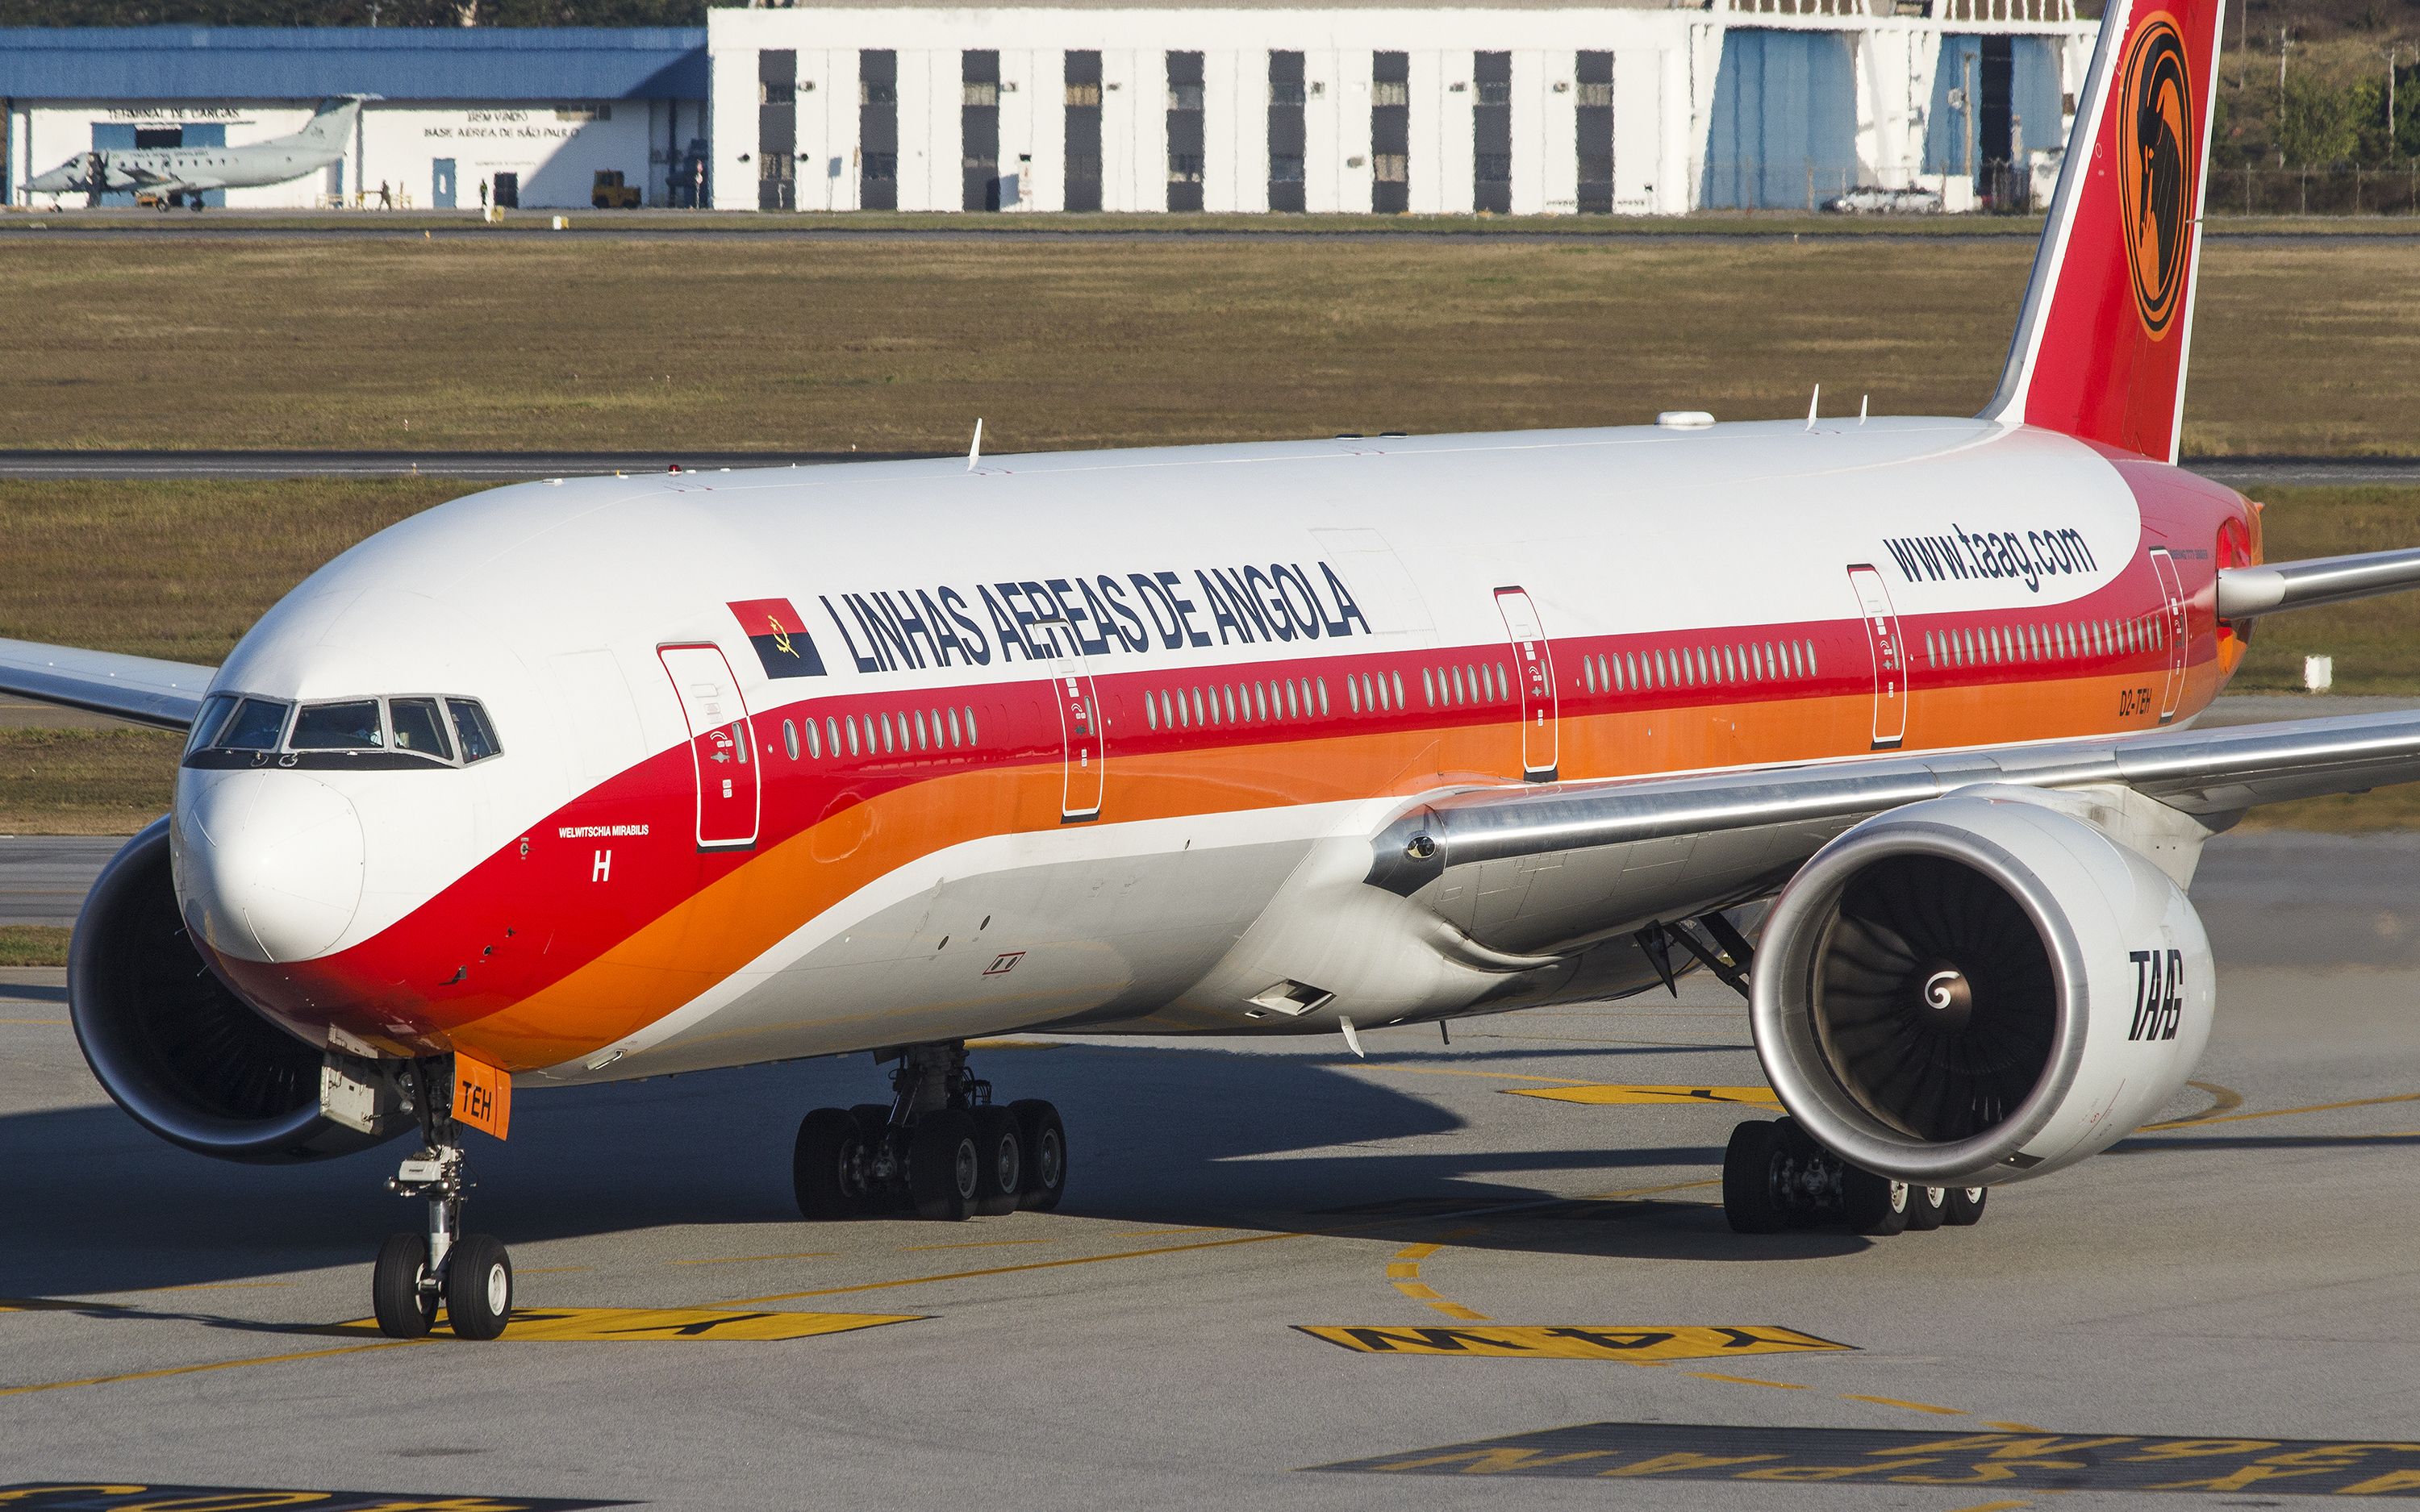 A TAAG Angola Boeing 777-300 